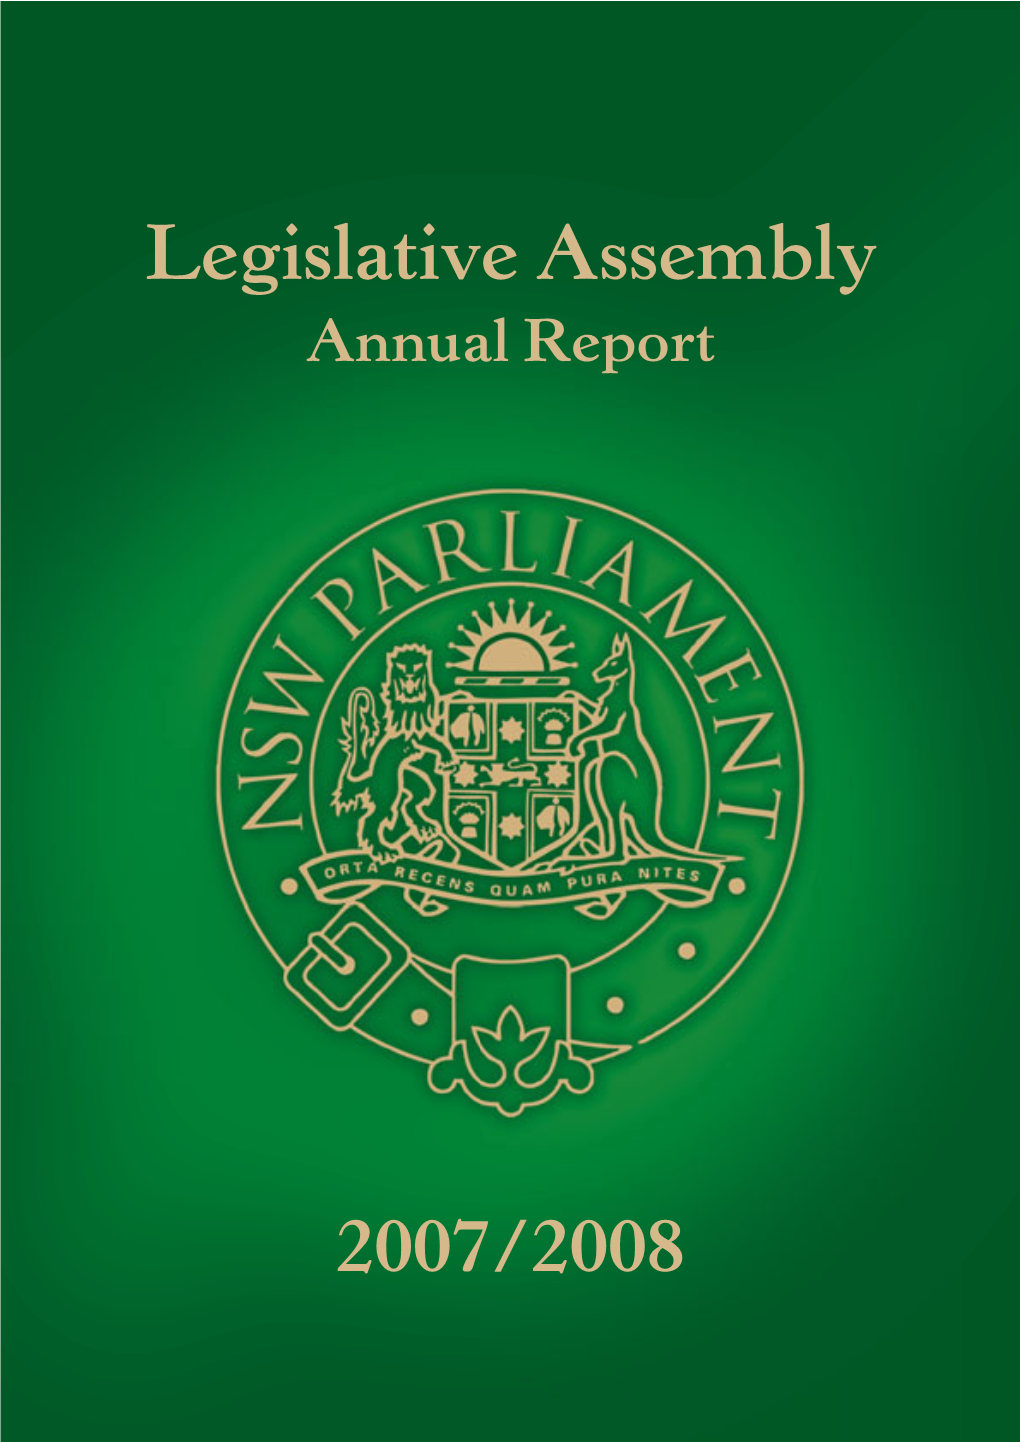 Department of the Legislative Assembly Annual Report for 2007-2008